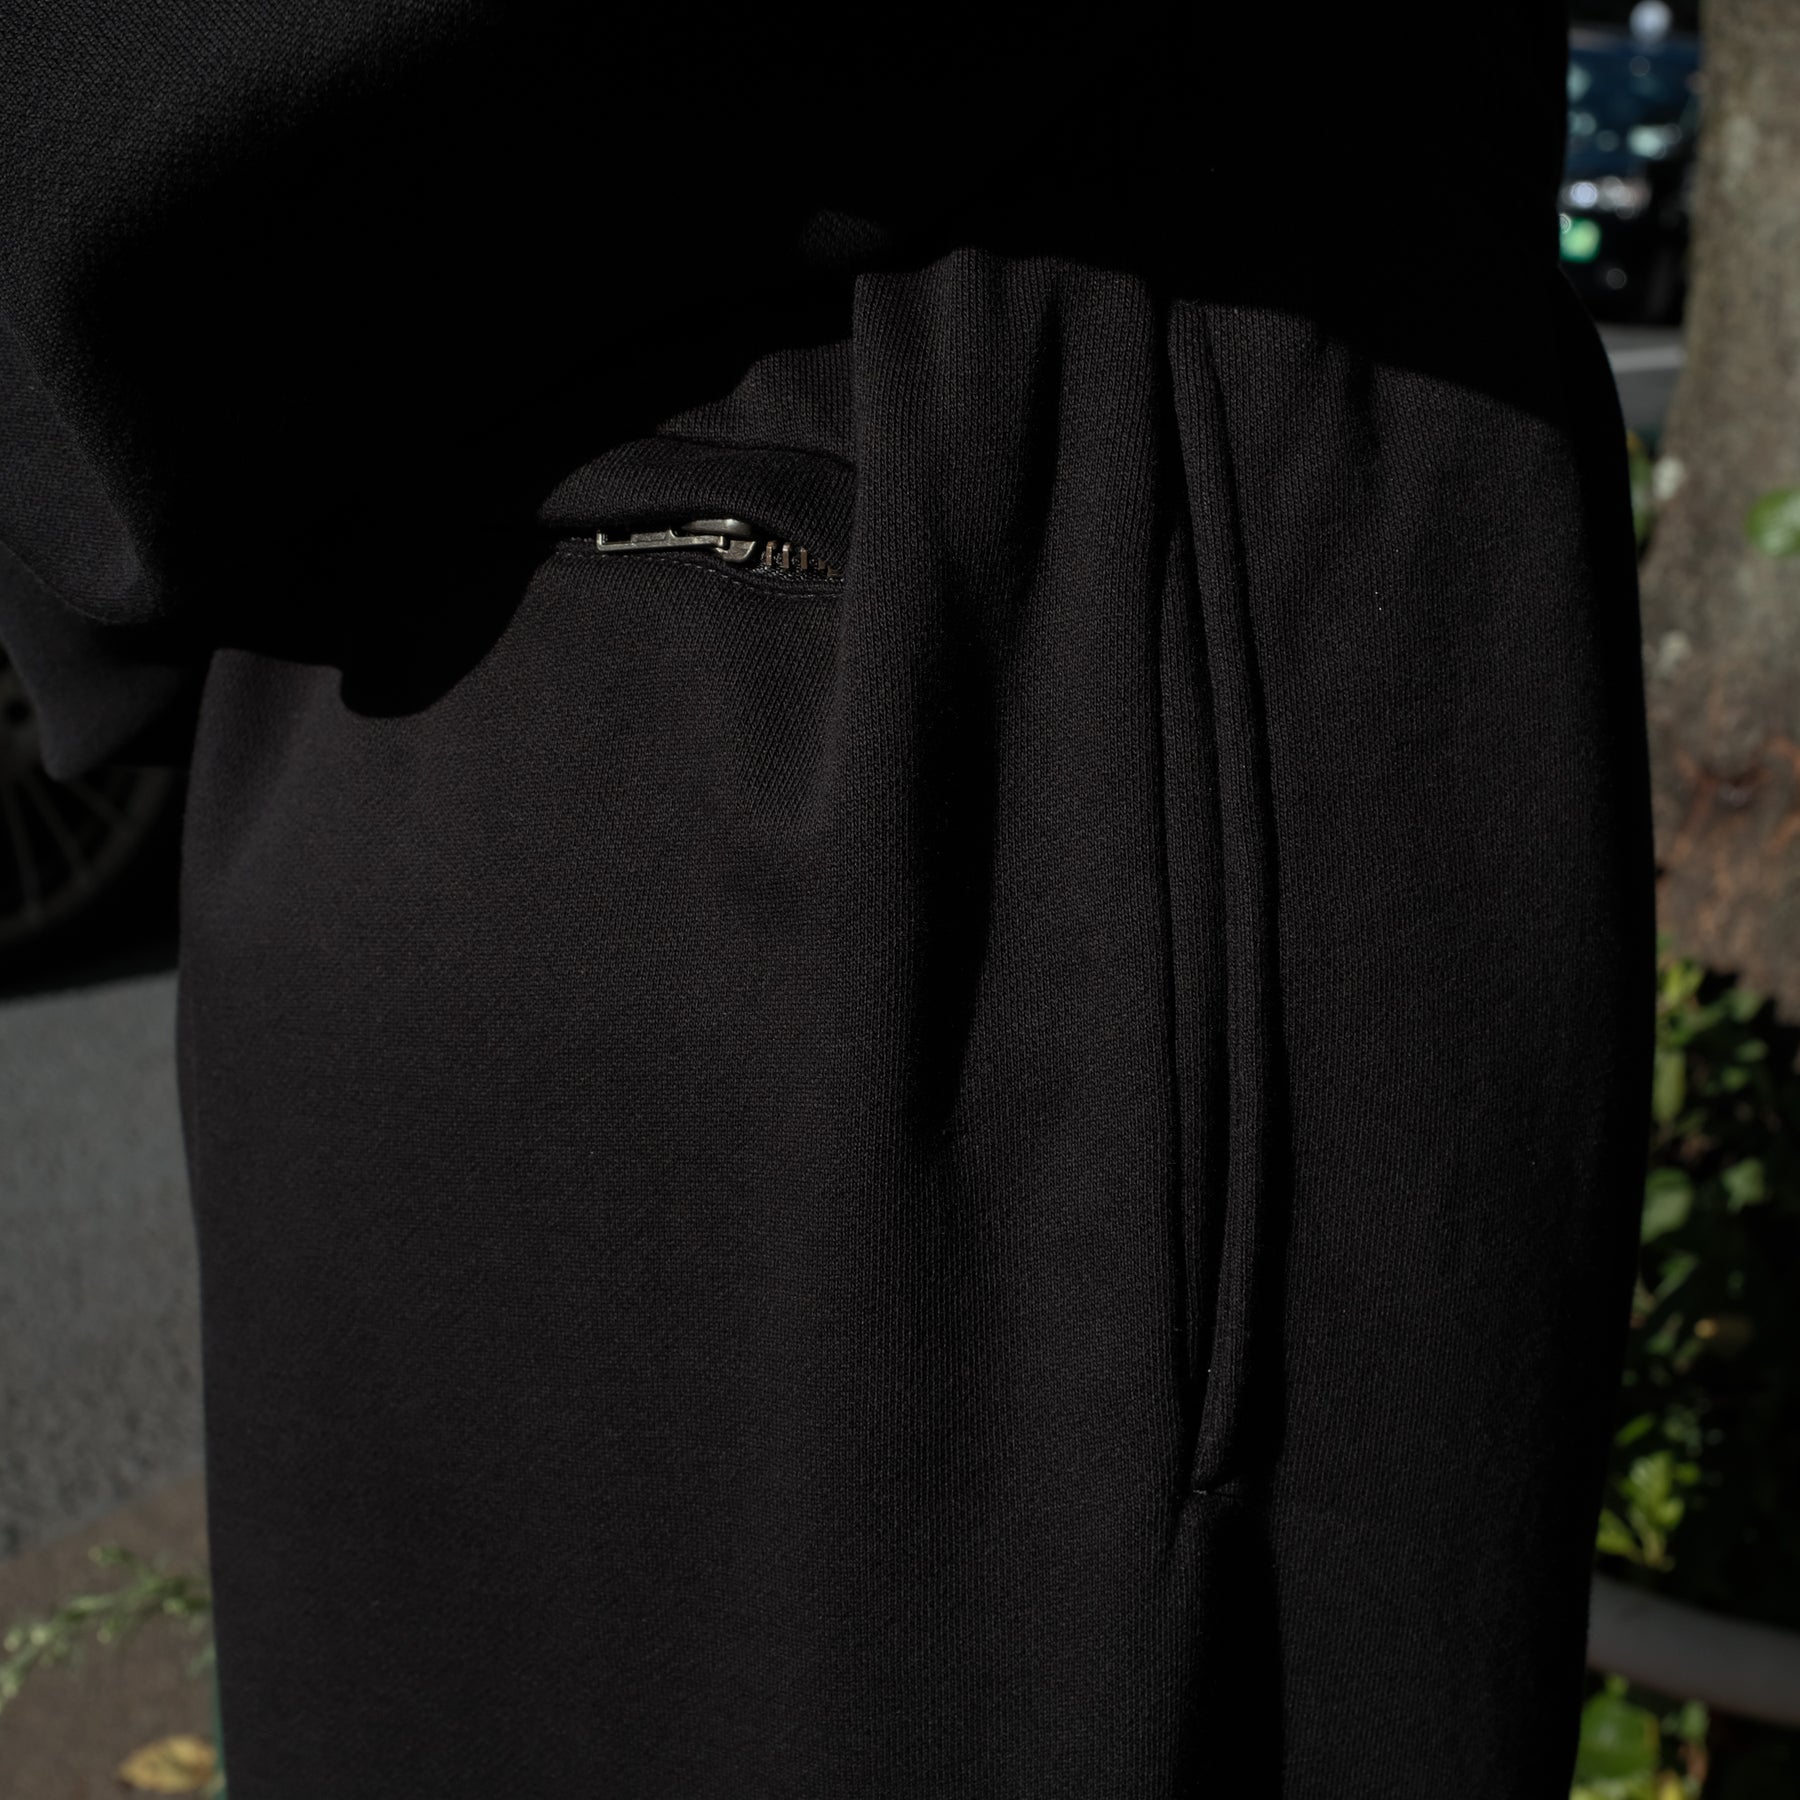 WILLY CHAVARRIA / CCCC SWEAT PANTS SOLID BLACK